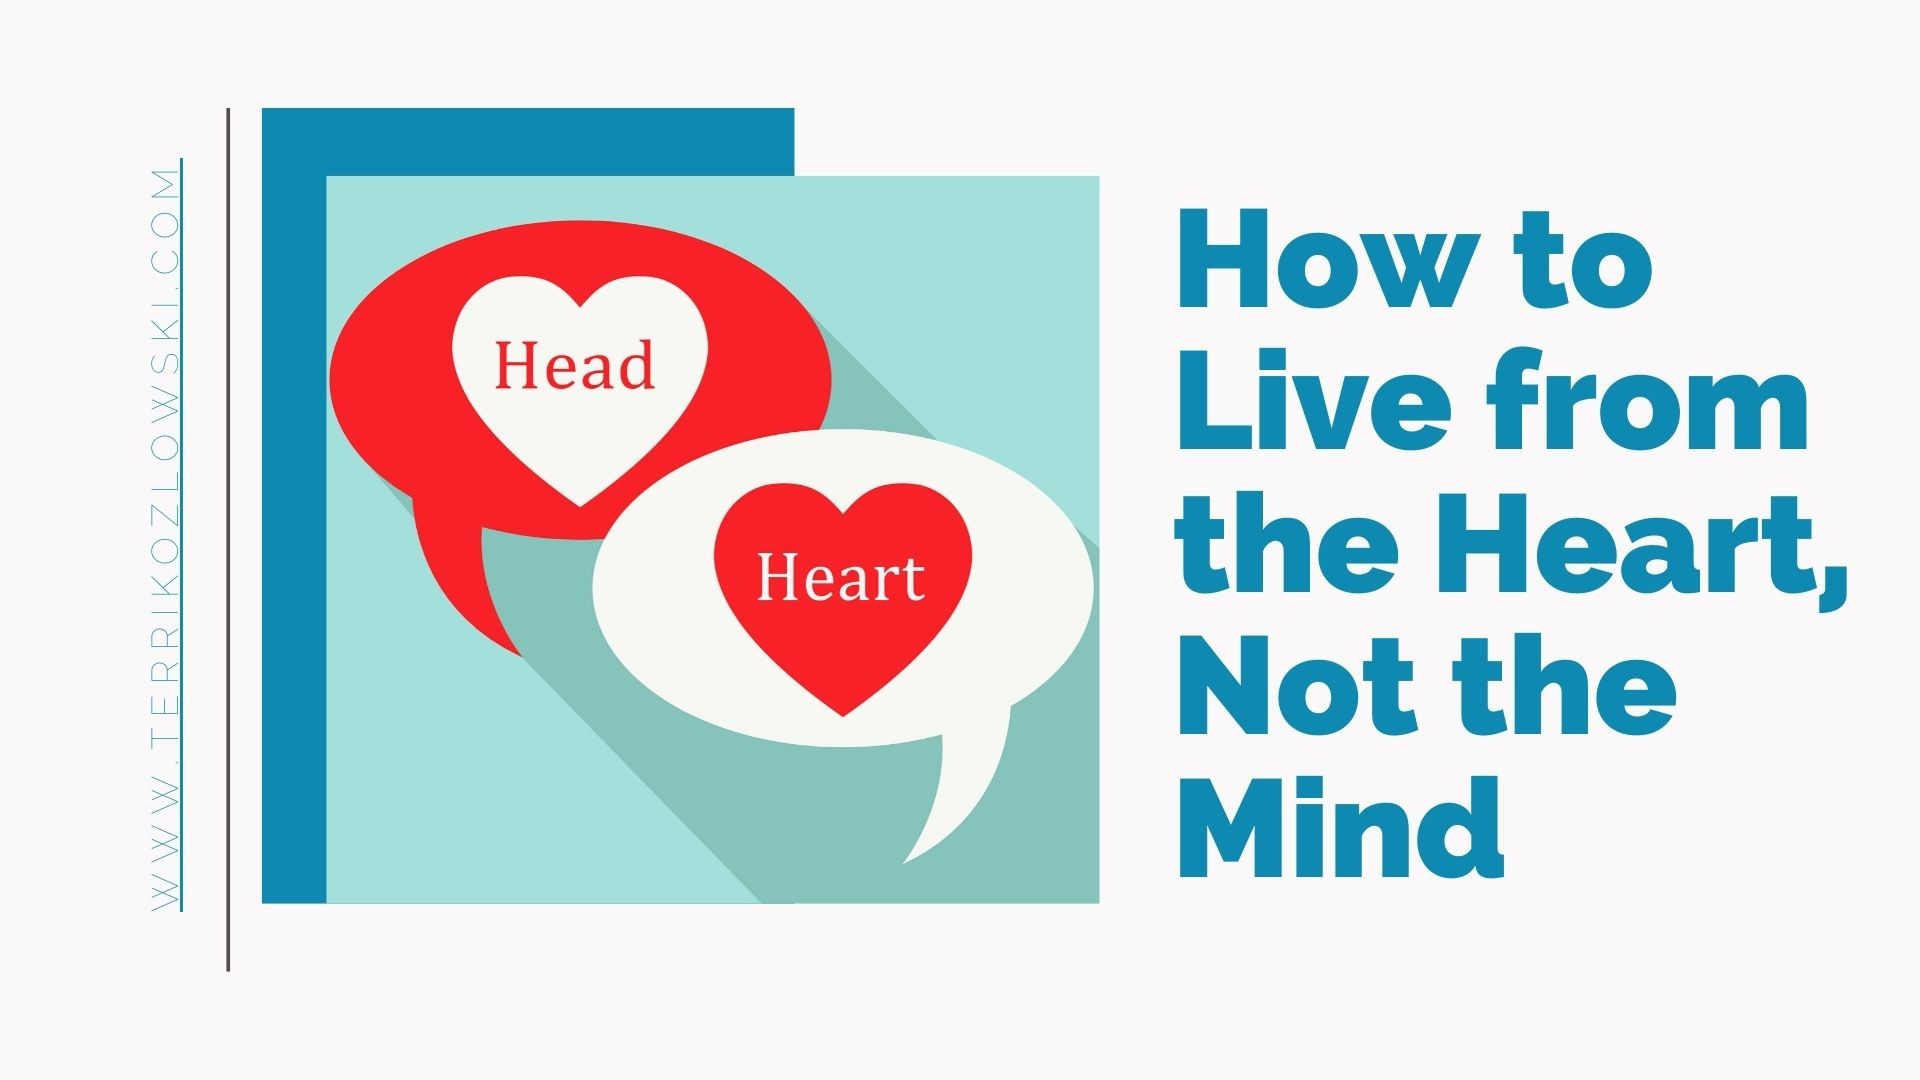 How to Live from the Heart, Not the Mind